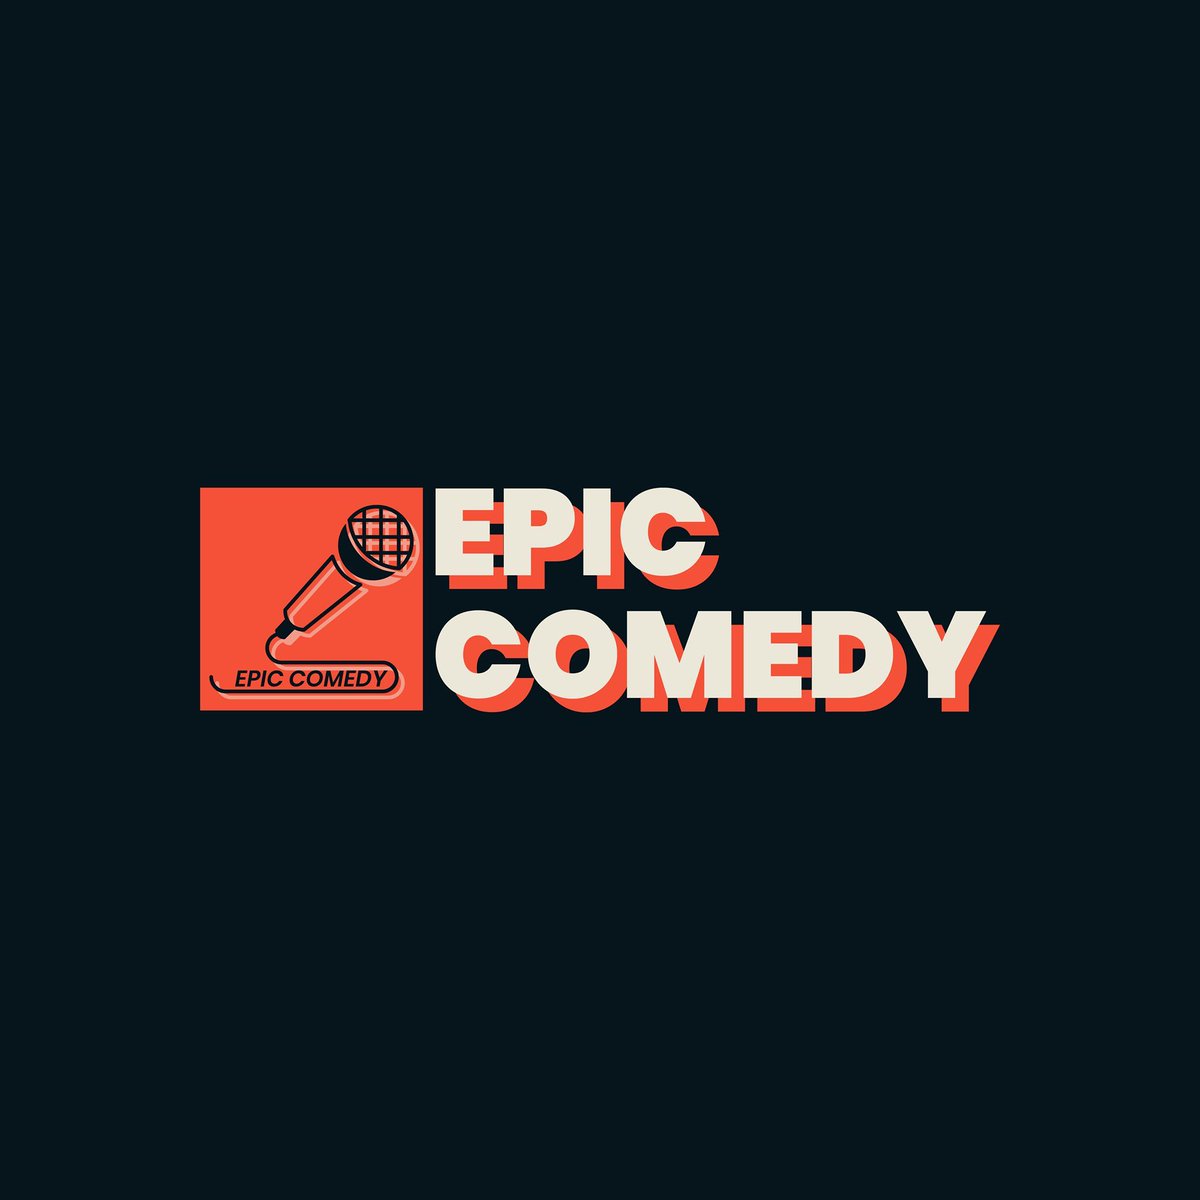 🤩EPIC COMEDY🤩
8 venues across #WestSussex #Hampshire #Dorset and #Berkshire all venues are fully accessible, cheap bar plus free parking @EpicComedy4

👉TICKETS : jokepit.com/comedy-by/epic…

#JOKEPIT FIND⭐️⭐️⭐️⭐️⭐️COMEDY NEAR YOU